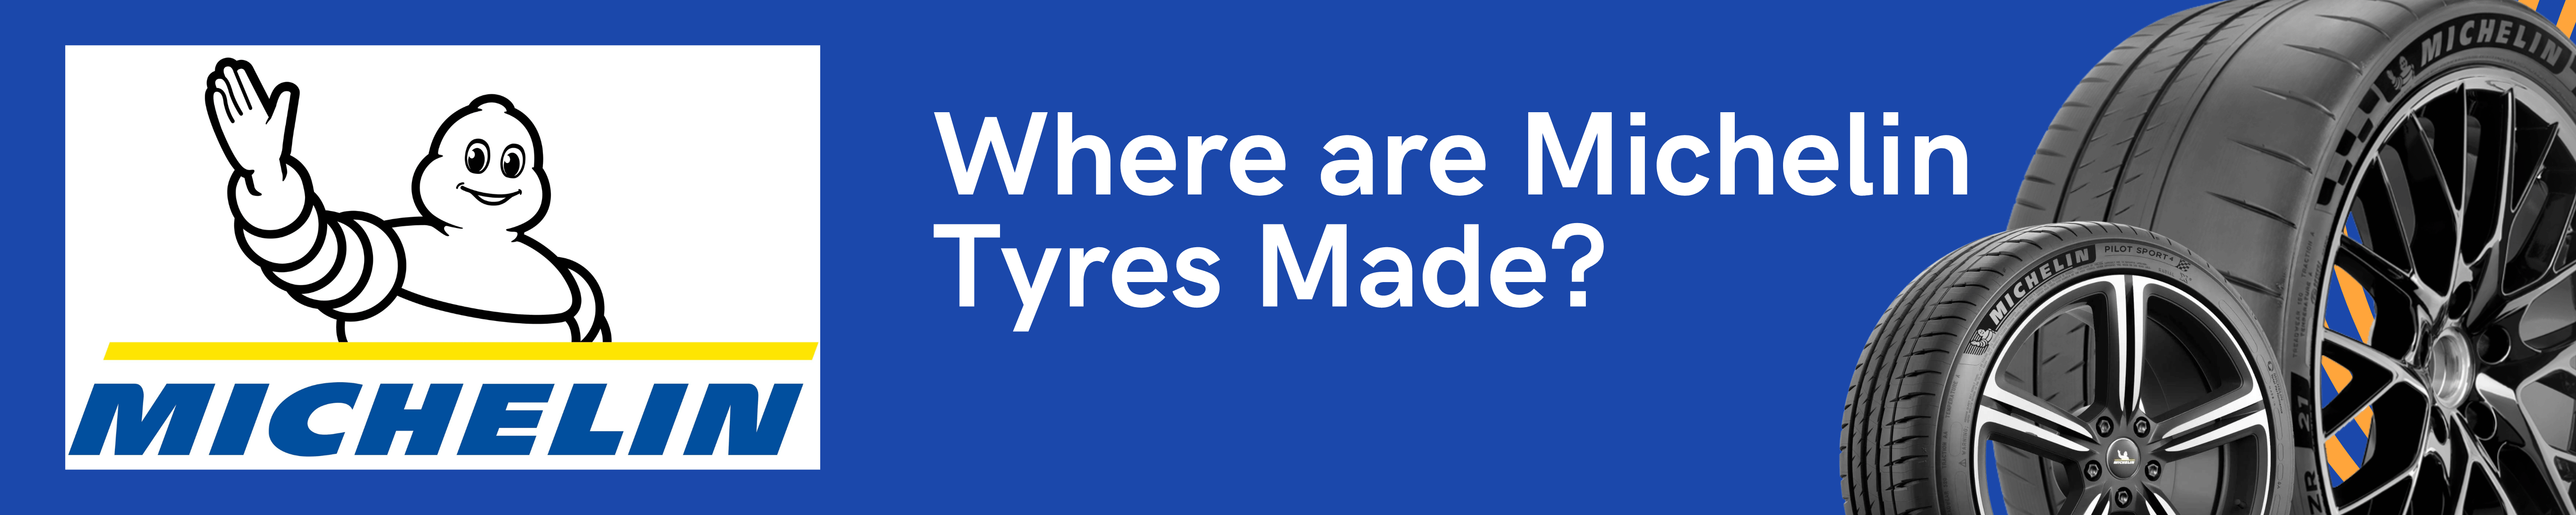 Where are Michelin Tyres Made?